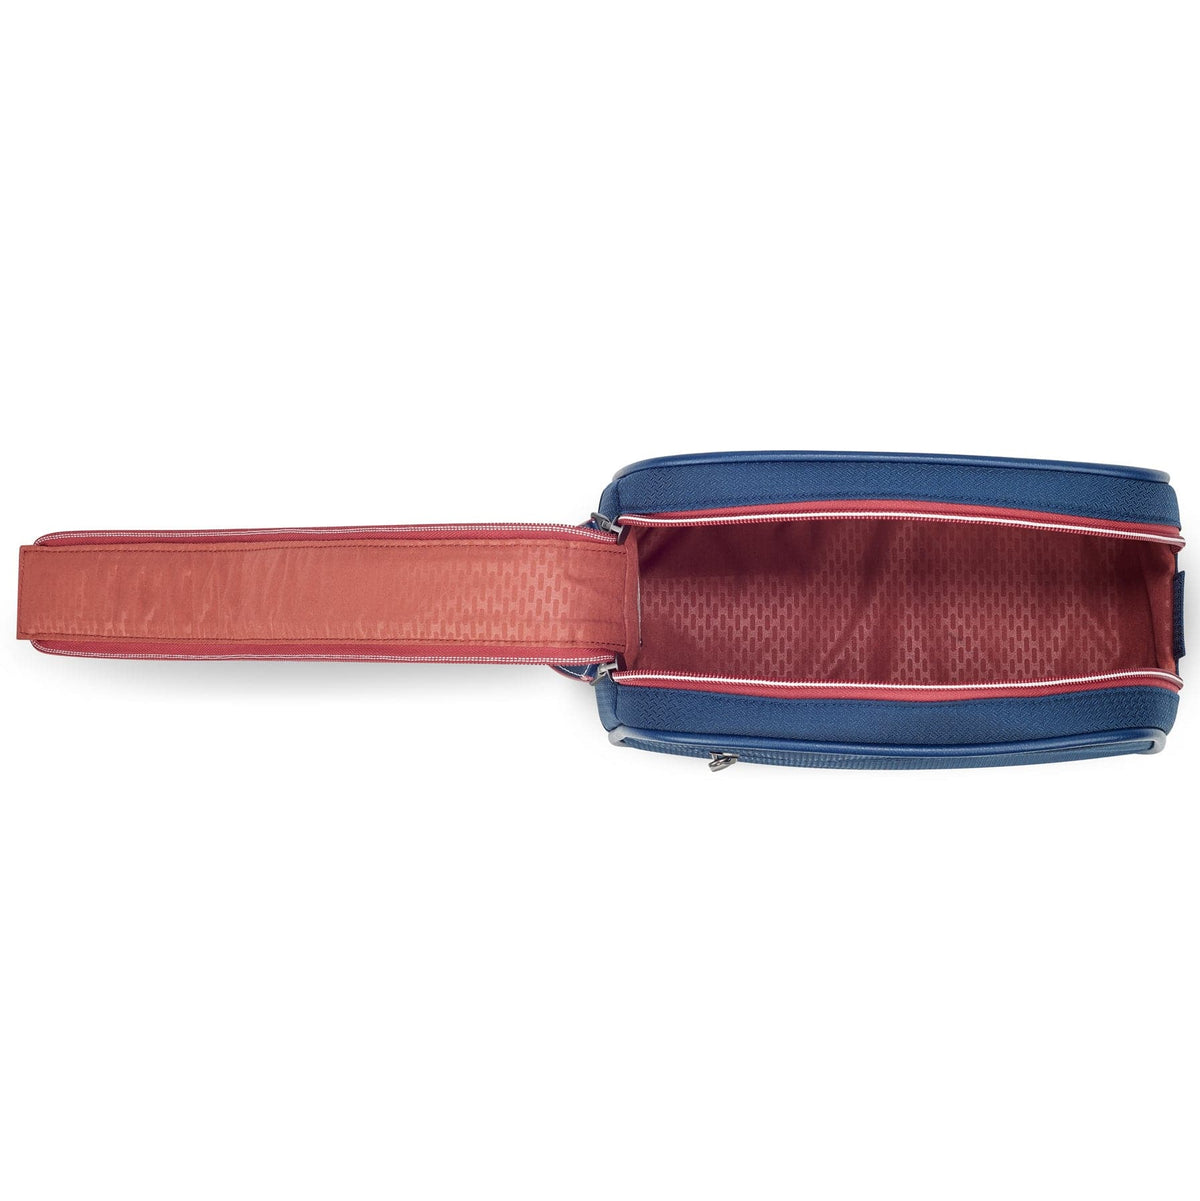 Delsey Chatelet Air Toiletry Bag